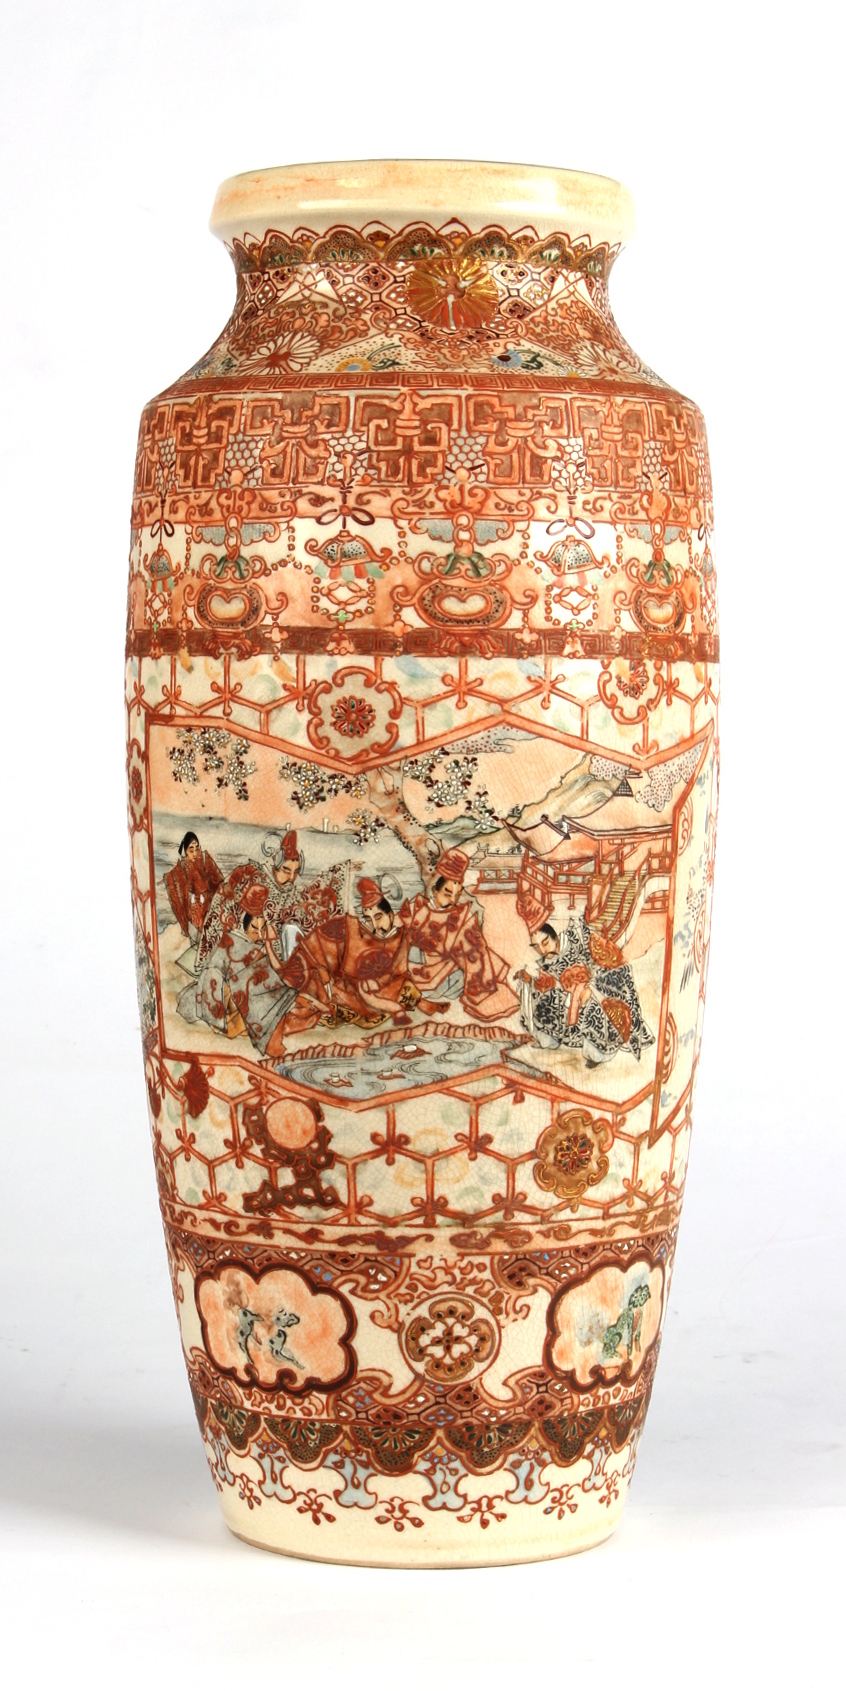 A Japanese Satsuma vase, early 20th century, painted with panels of seated figures & boys, 15.